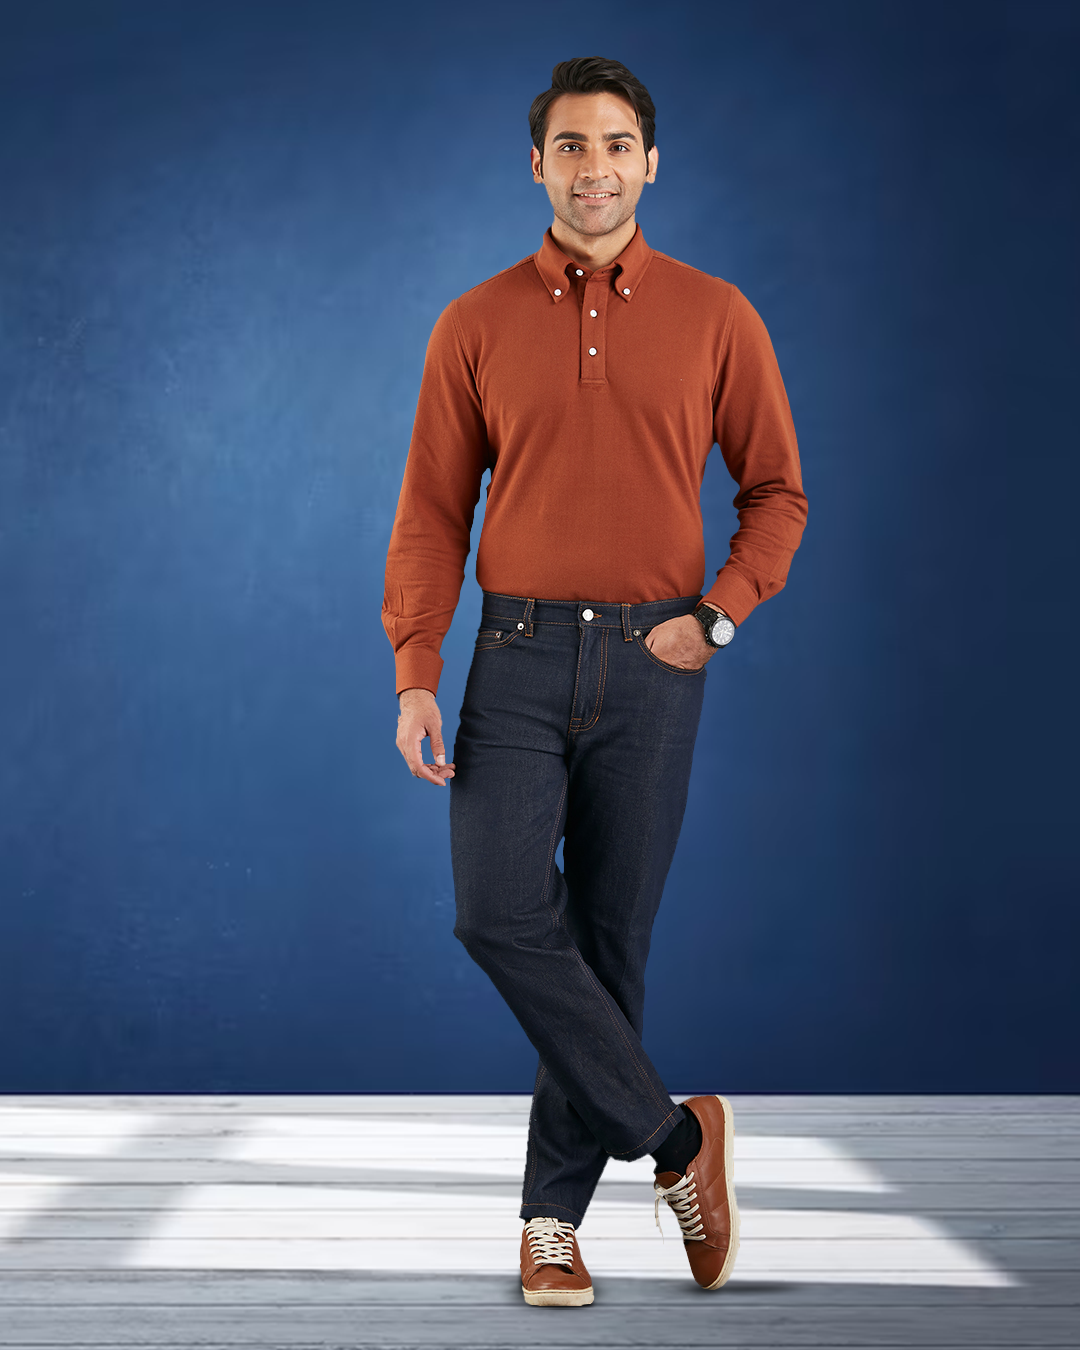 Model wearing the custom oxford polo shirt for men by Luxire in copper one hand in pocket